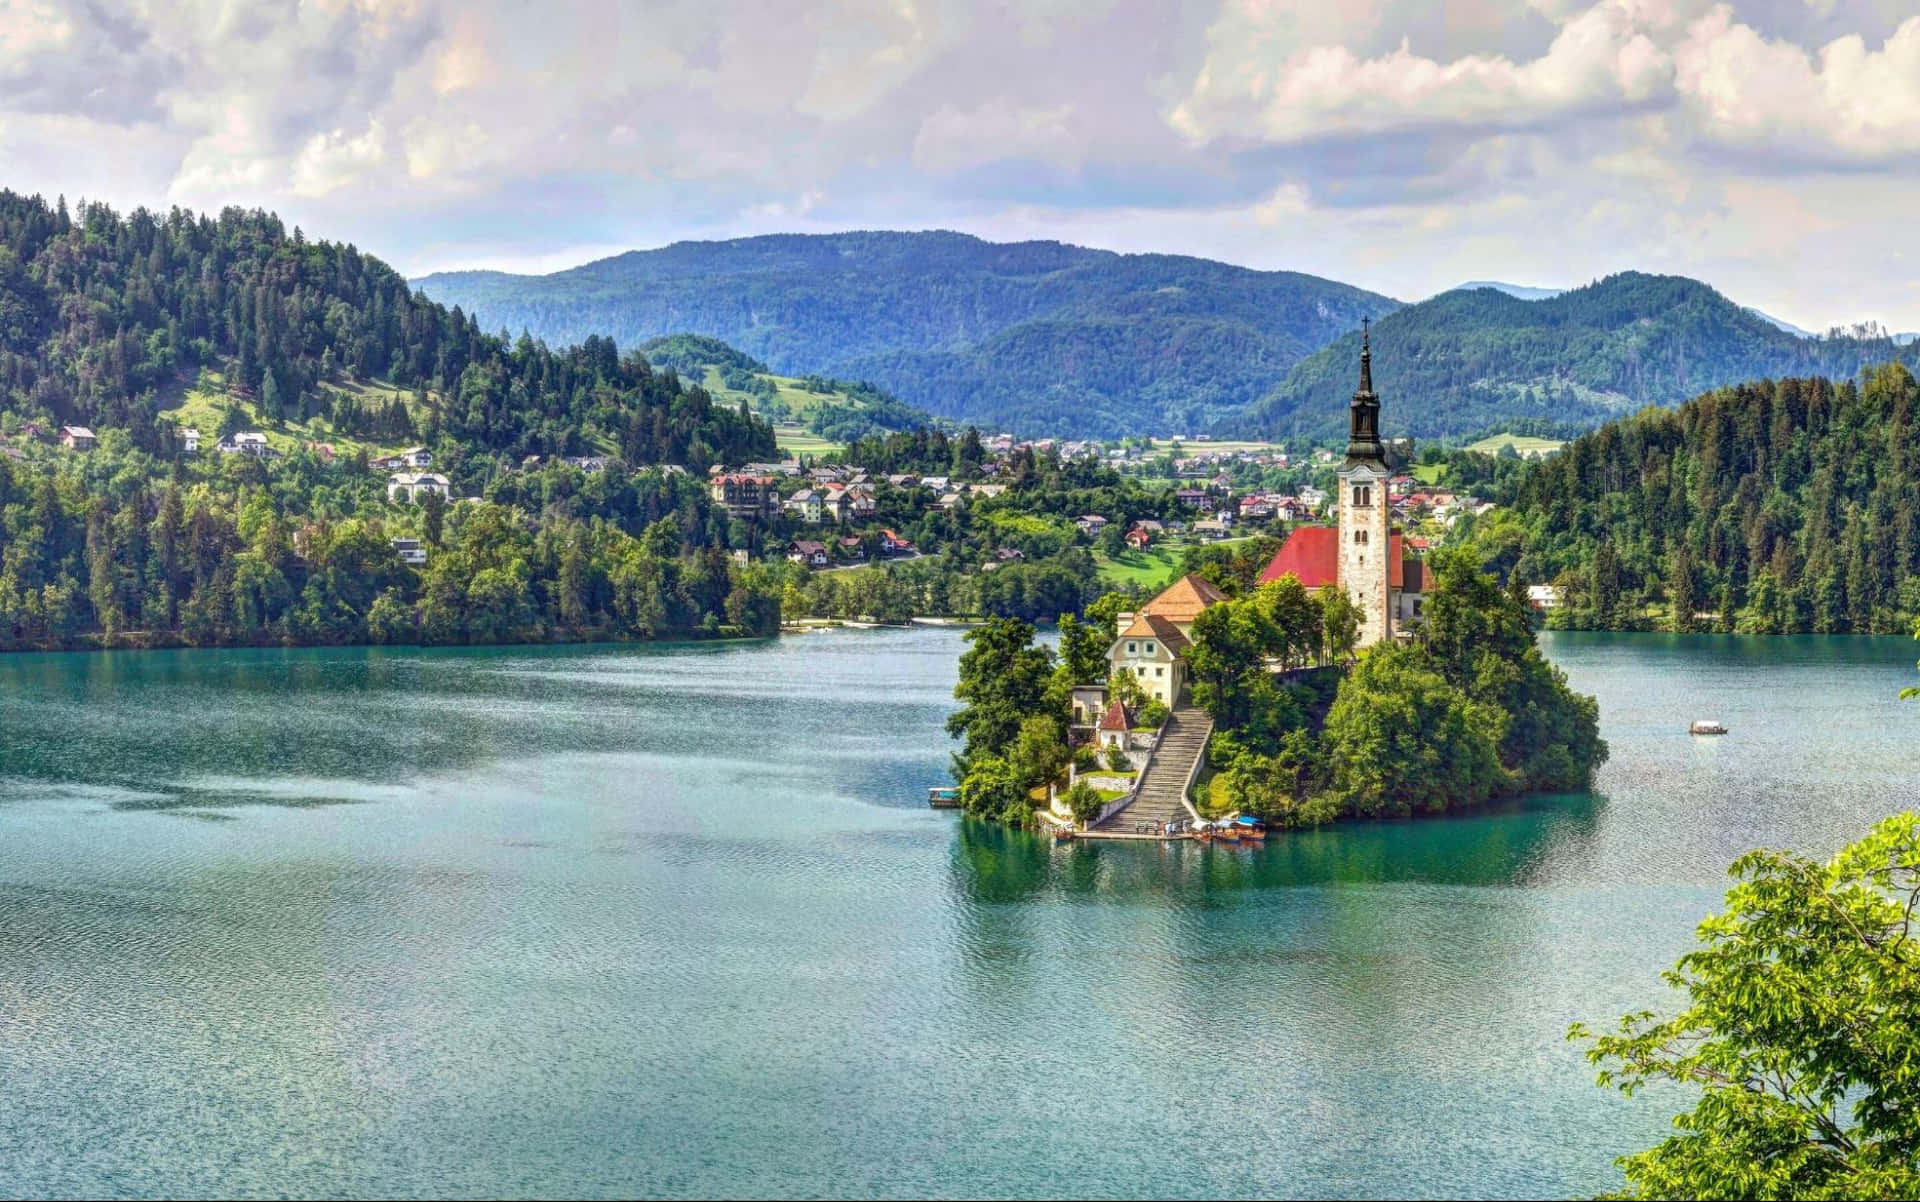 "Scenic View of the Iconic Church on Lake Bled Island" Wallpaper